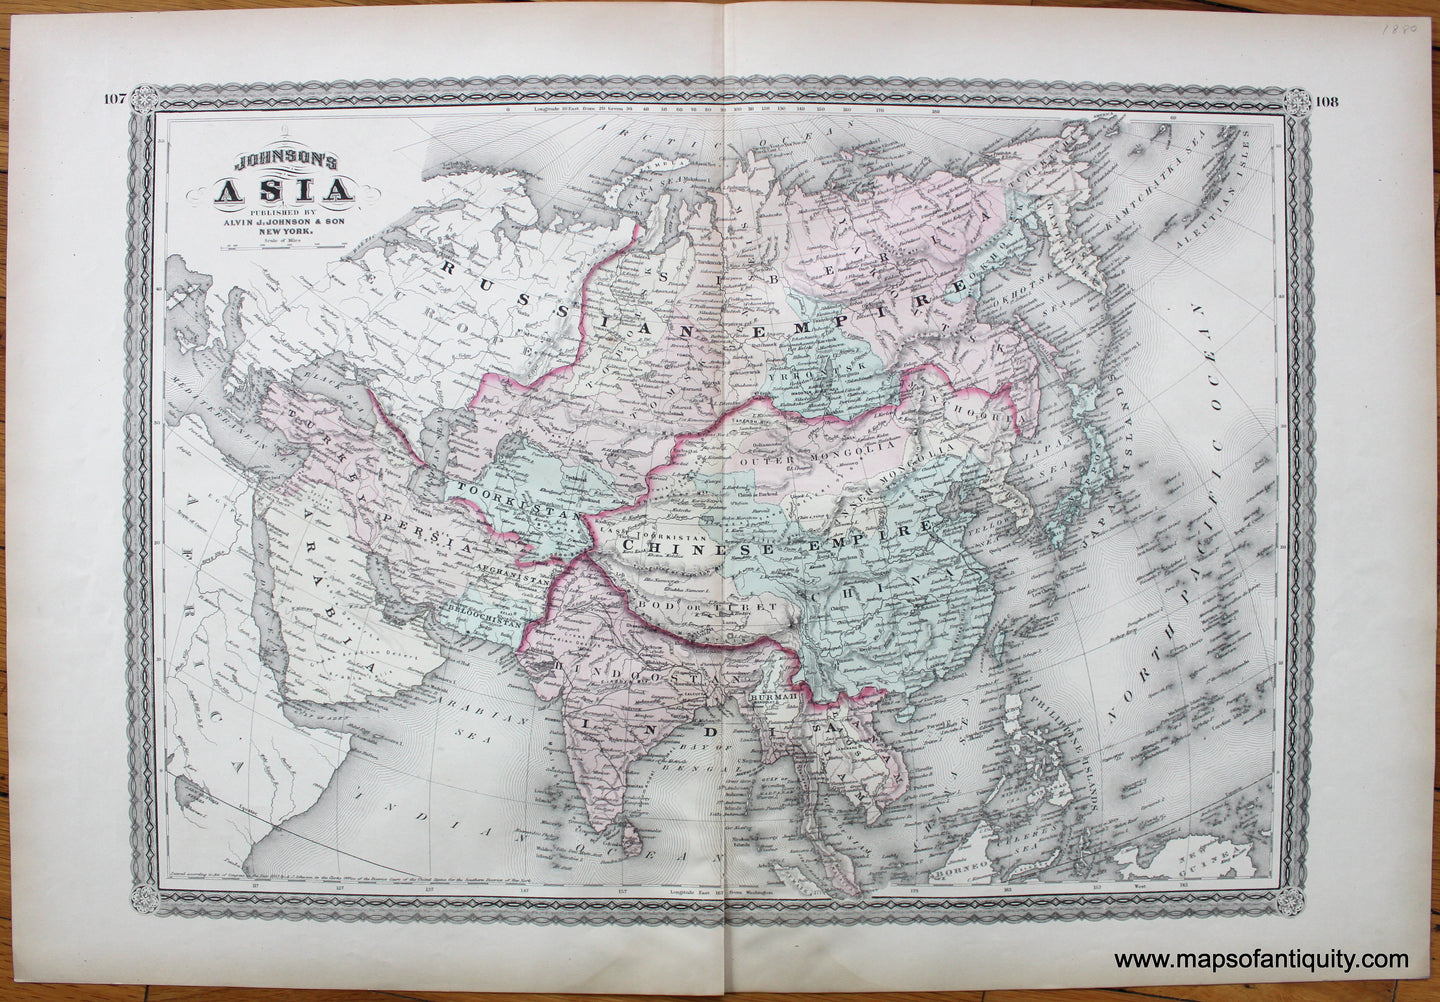 Antique-Map-Asia-Johnson-Son-1880-1800s-19th-century-Maps-of-Antiquity